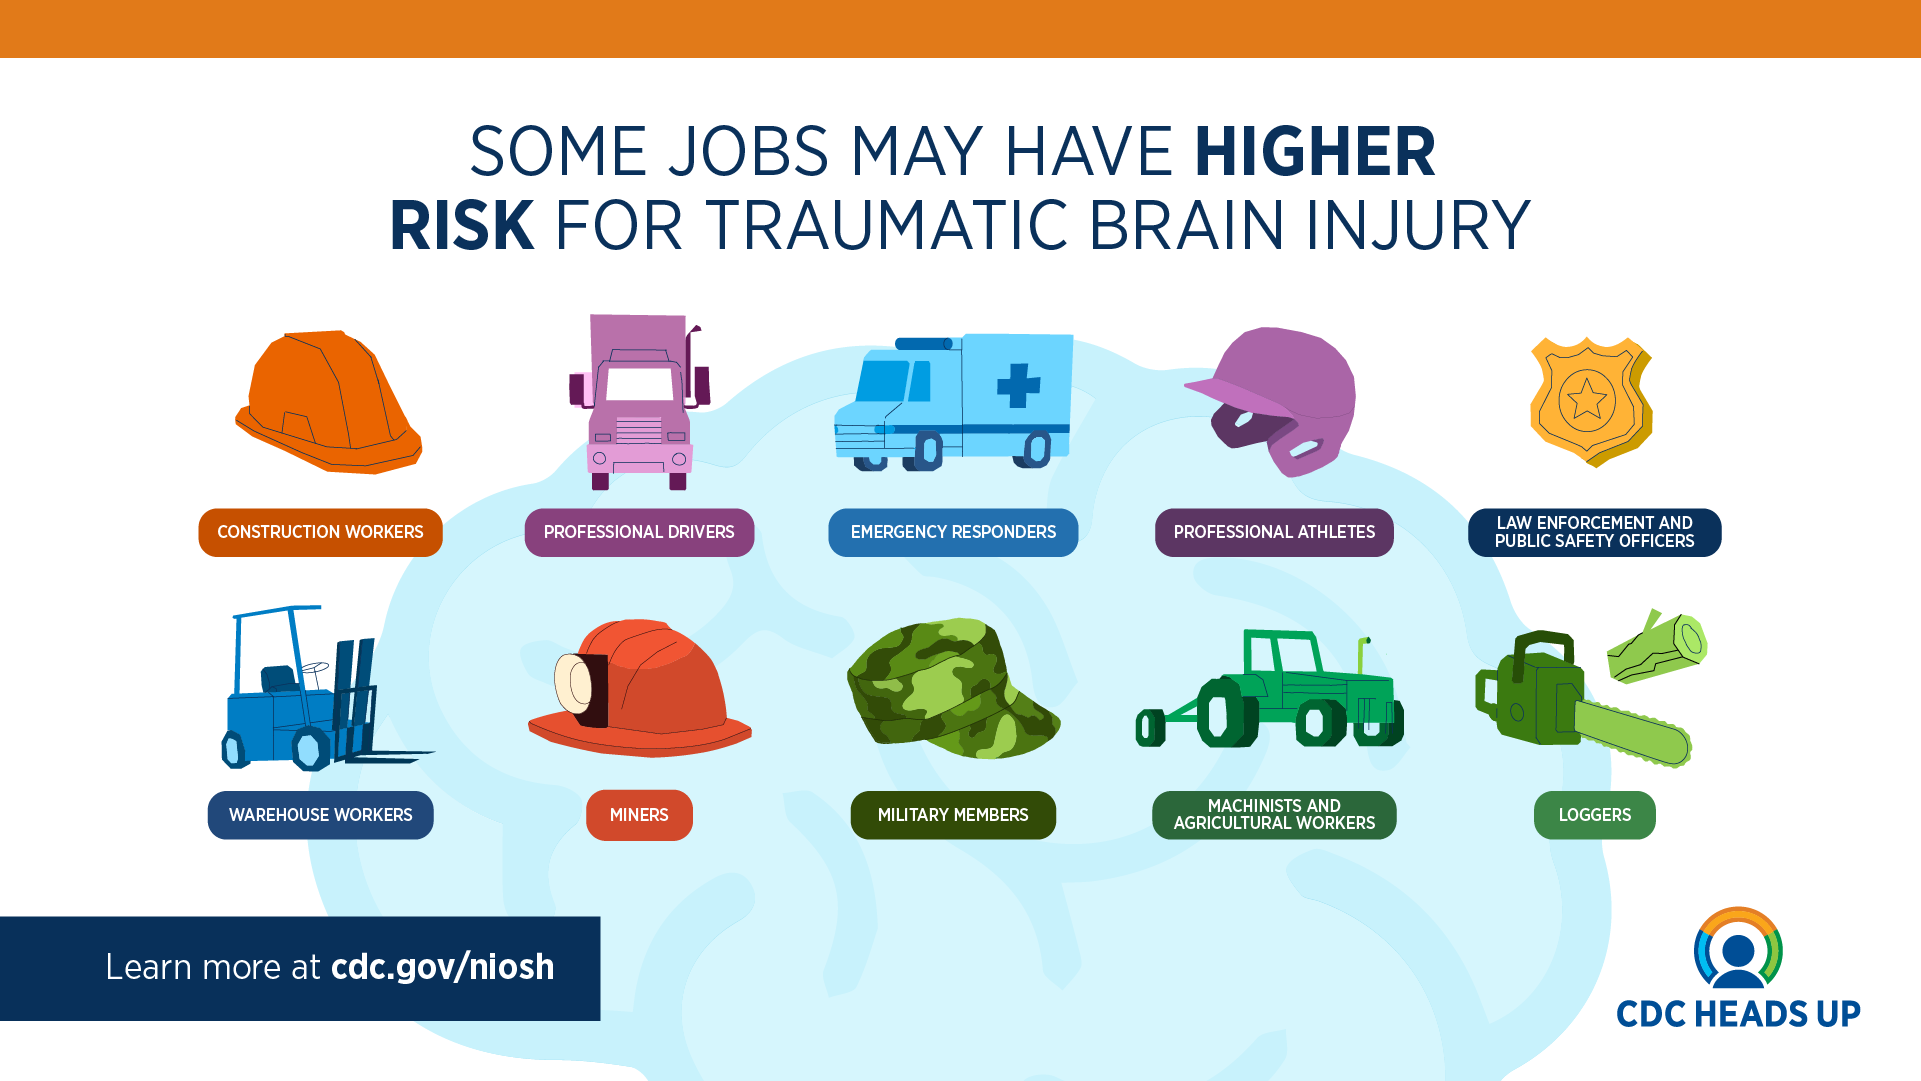 Some jobs may have higher risk for Traumatic Brain Injury, including construction workers, professional drivers, emergency responders, minders, warehouse workers, professional athletes, loggers, law enforcement officers, machinists, and agricultural workers.